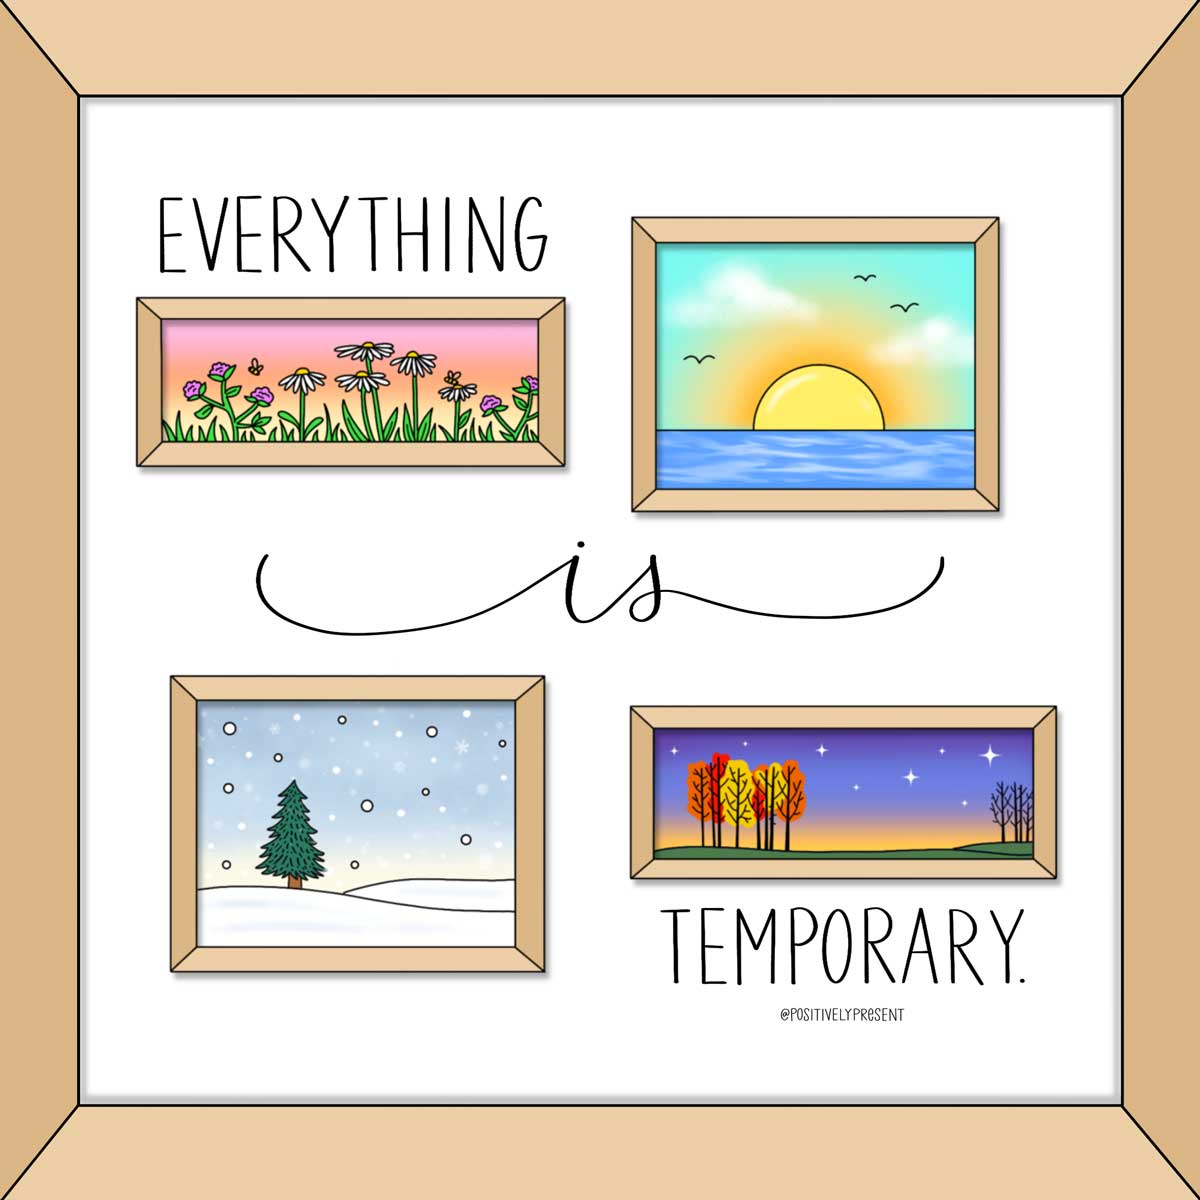 Framed art of 4 seasons says everything is temporary.